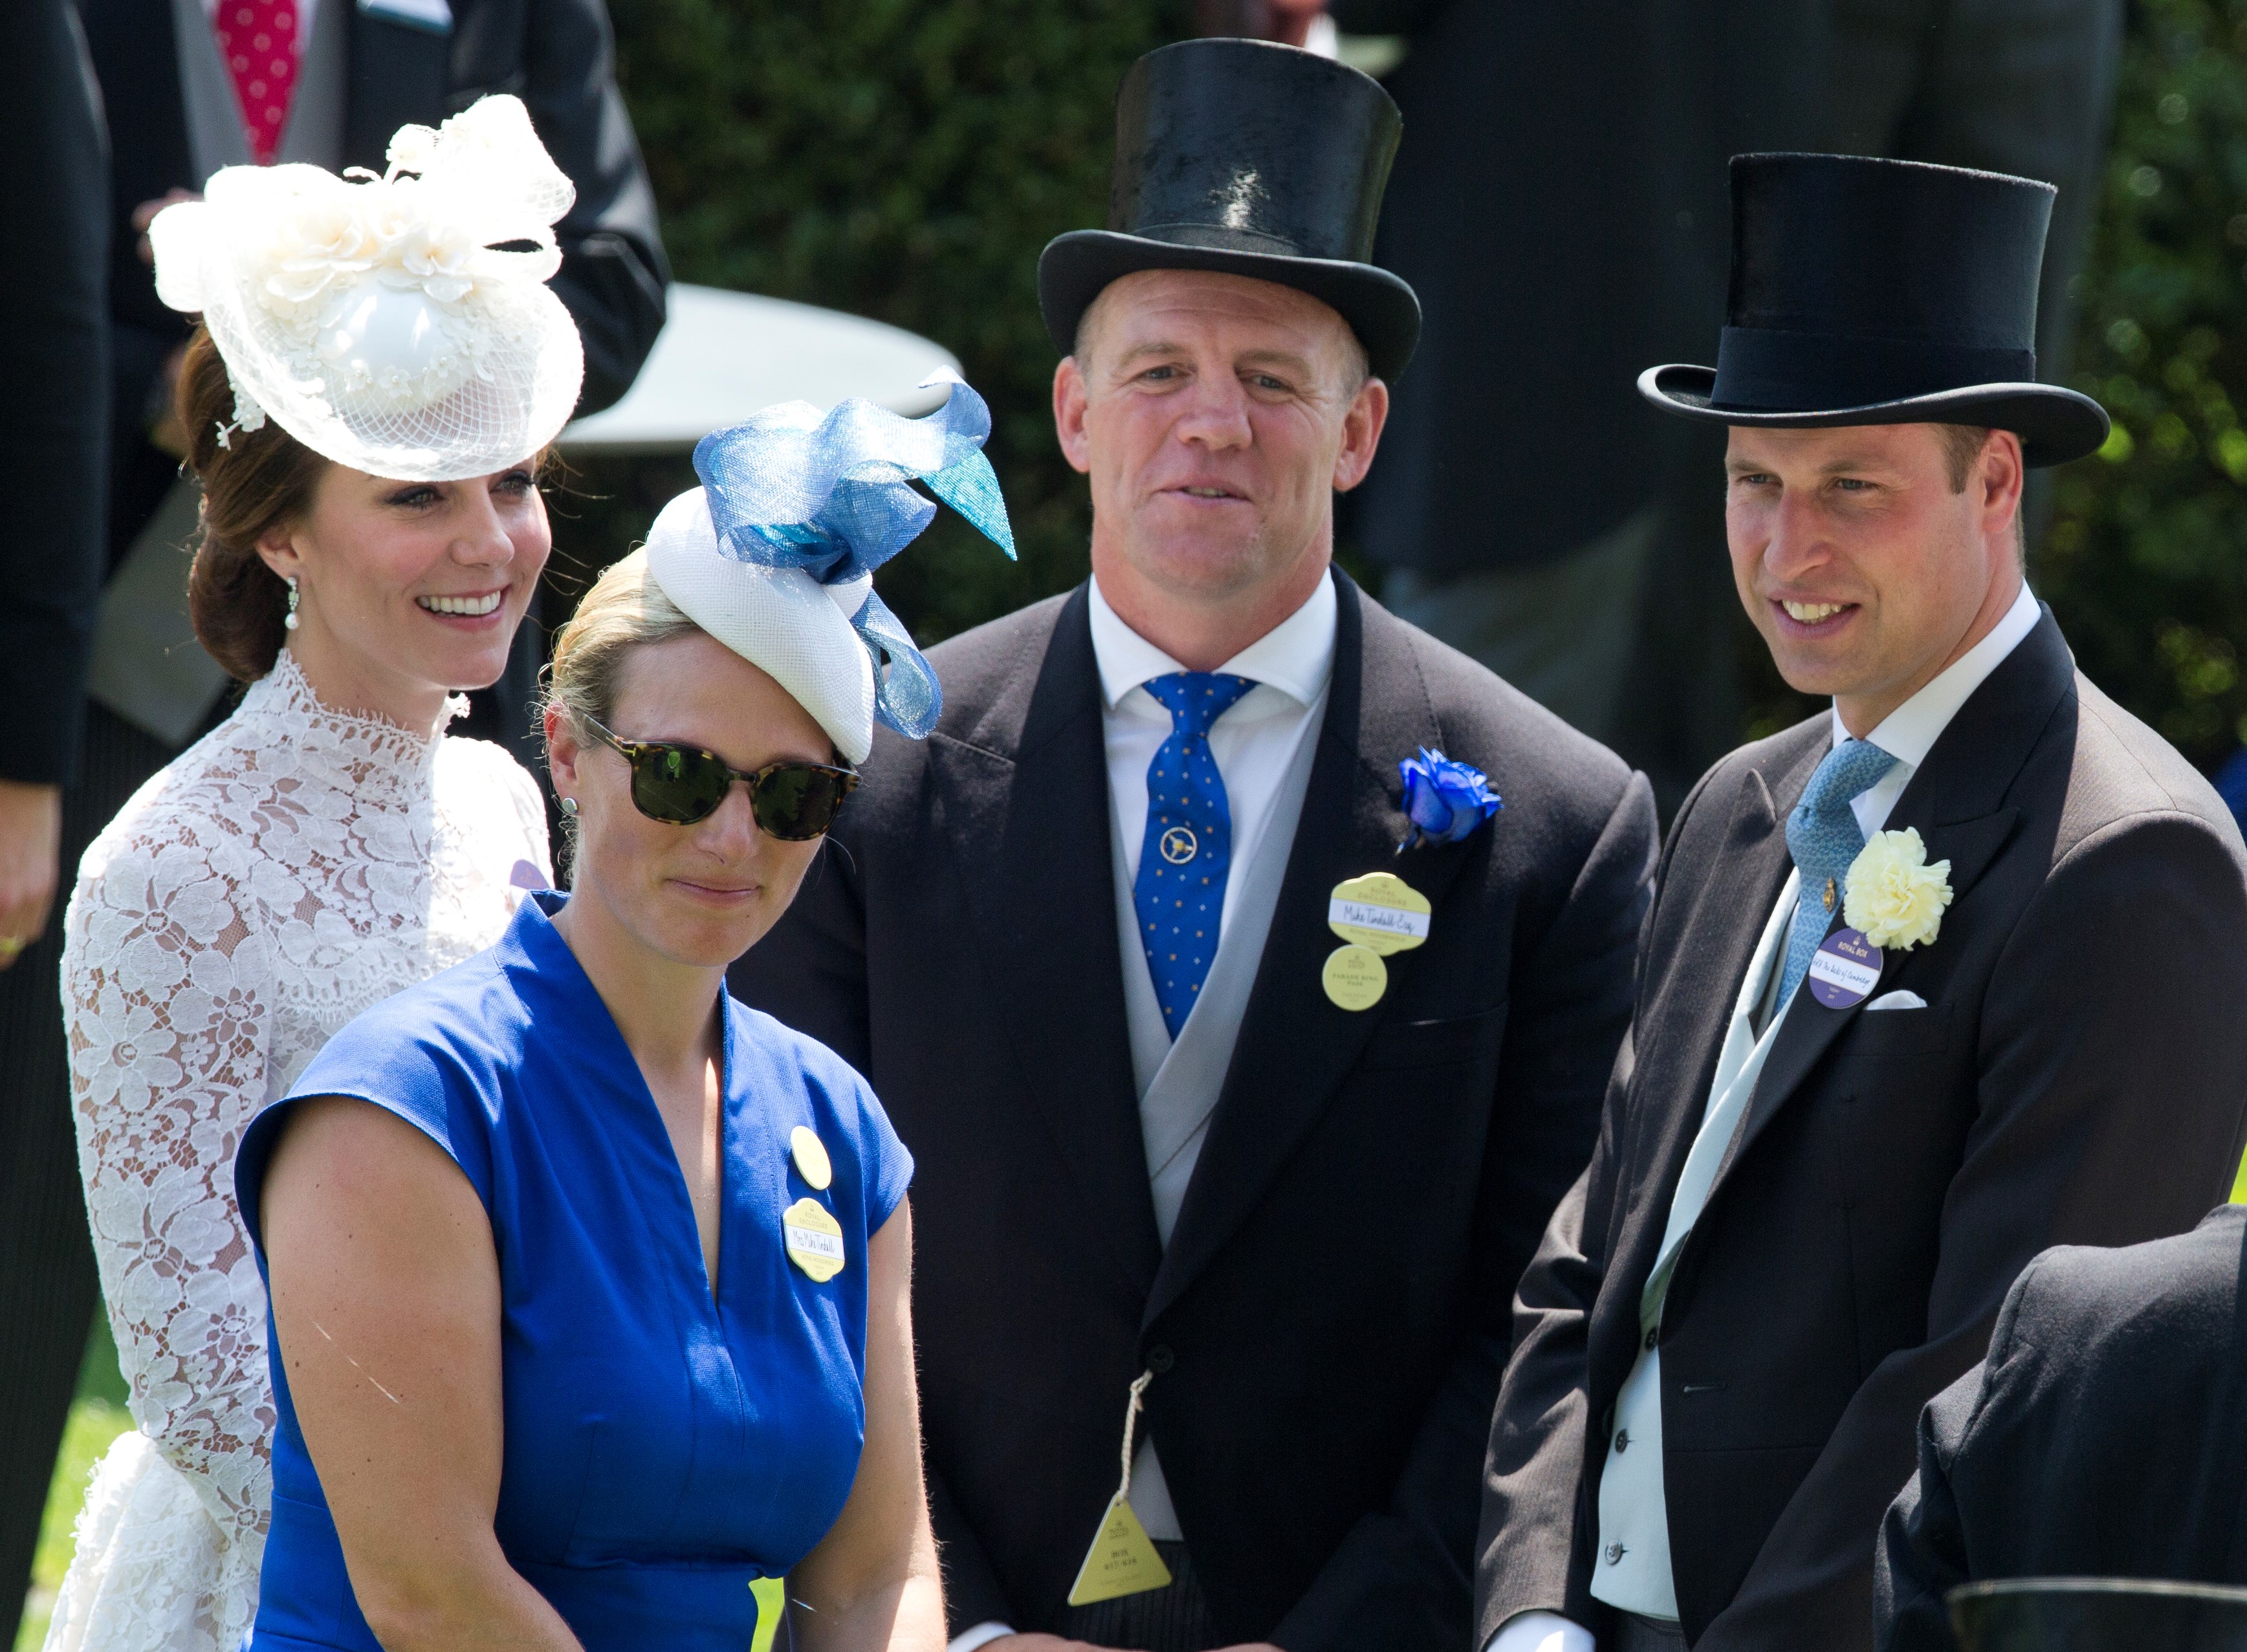 (L to R): Kate Middleton, Zara Phillips, Mike Tindall, and Prince William smiling together at Royal Ascot